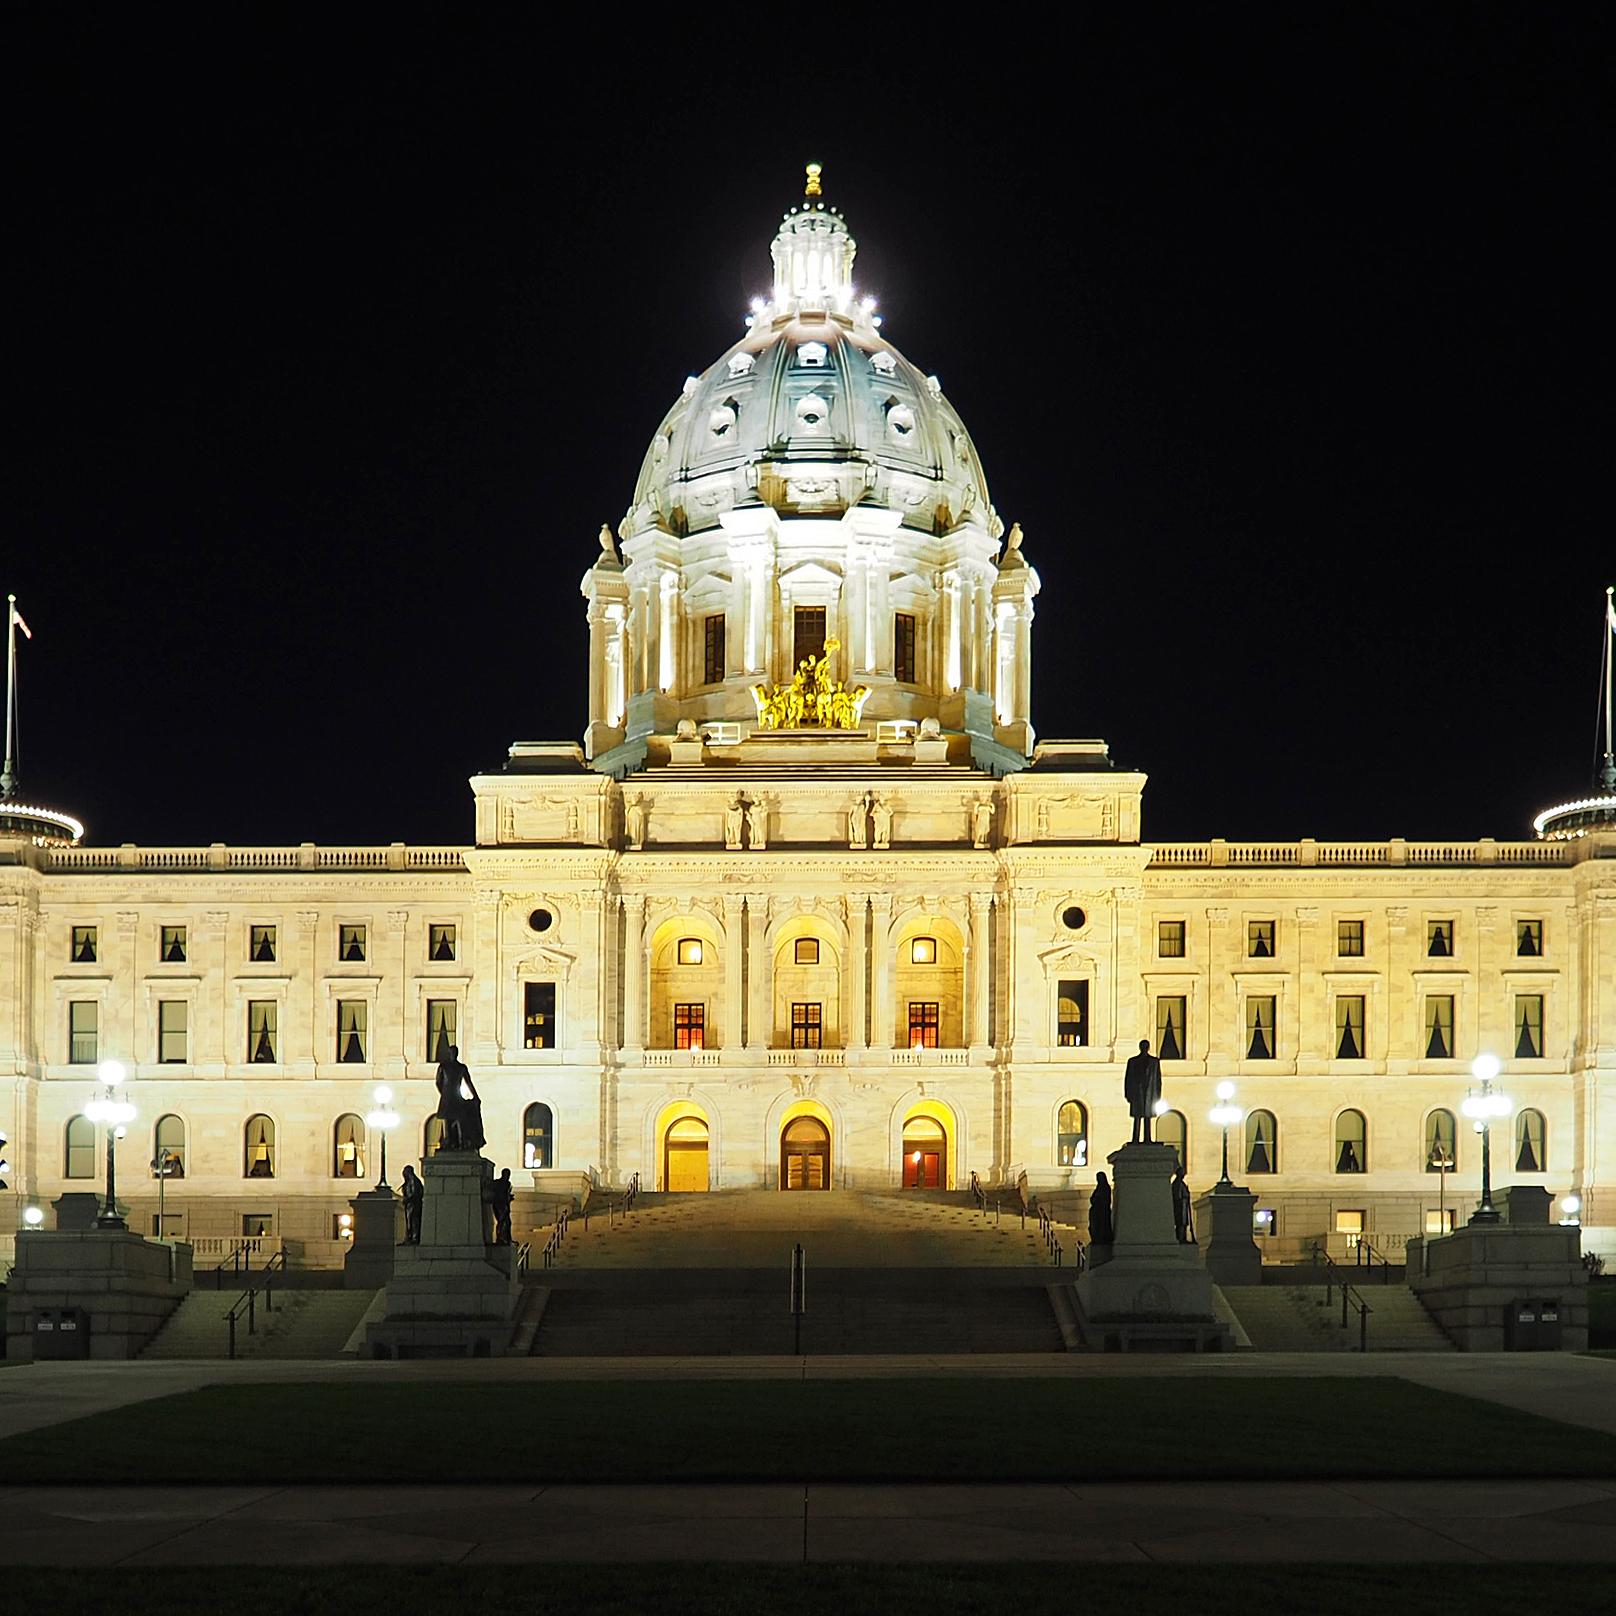 A photograph of the Minnesota State Capitol building taken at night.